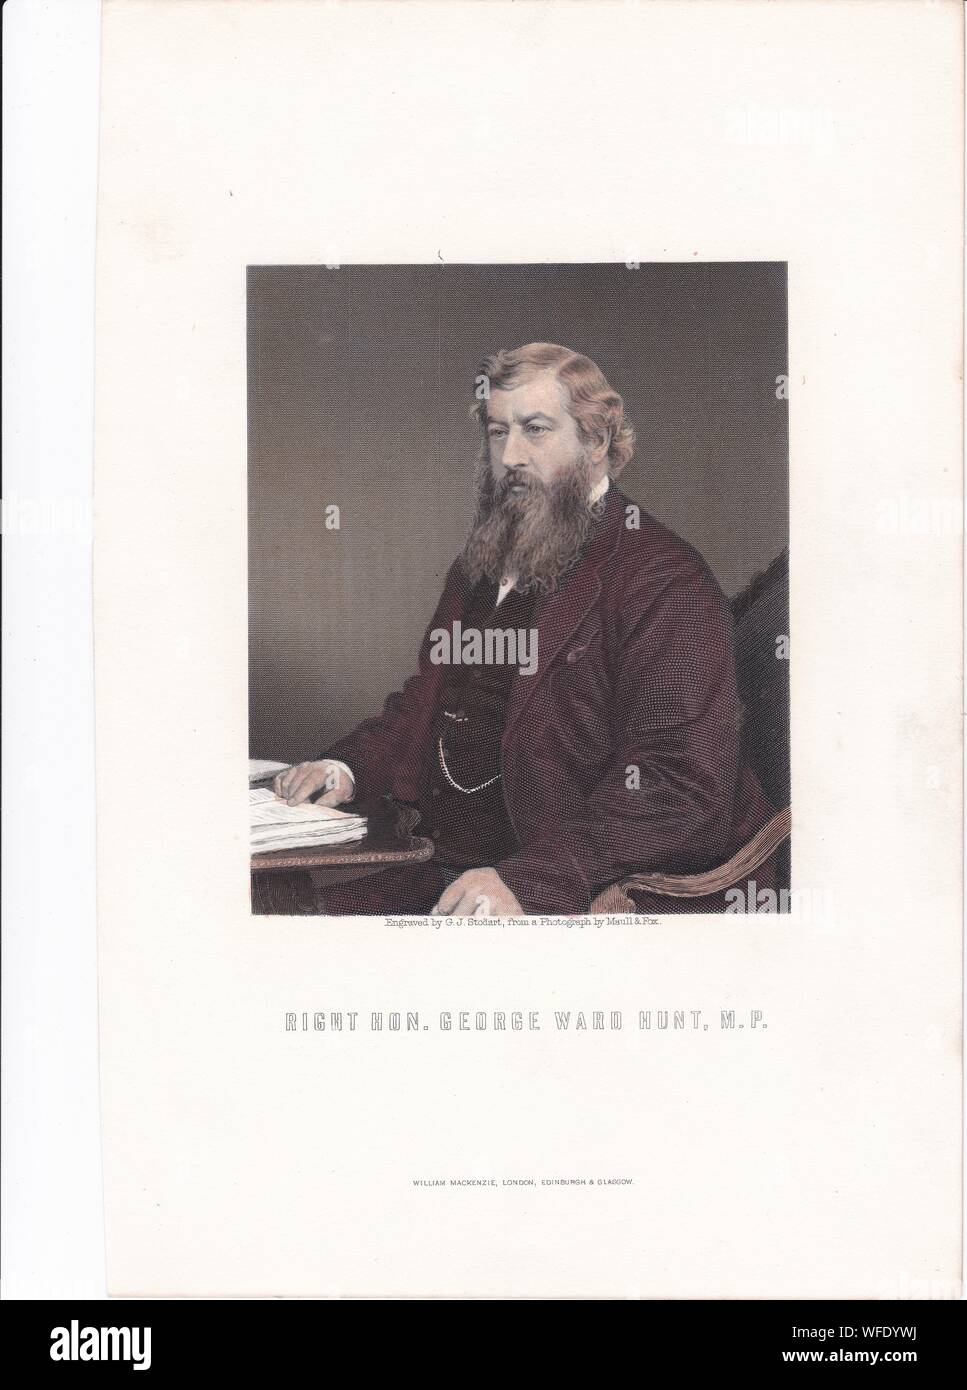 Book plate / print of 'The Right Hon. George Ward Hunt'. M.P. British statesman of the Conservative Party.  Chancellor of the Exchequer and First Lord. Stock Photo